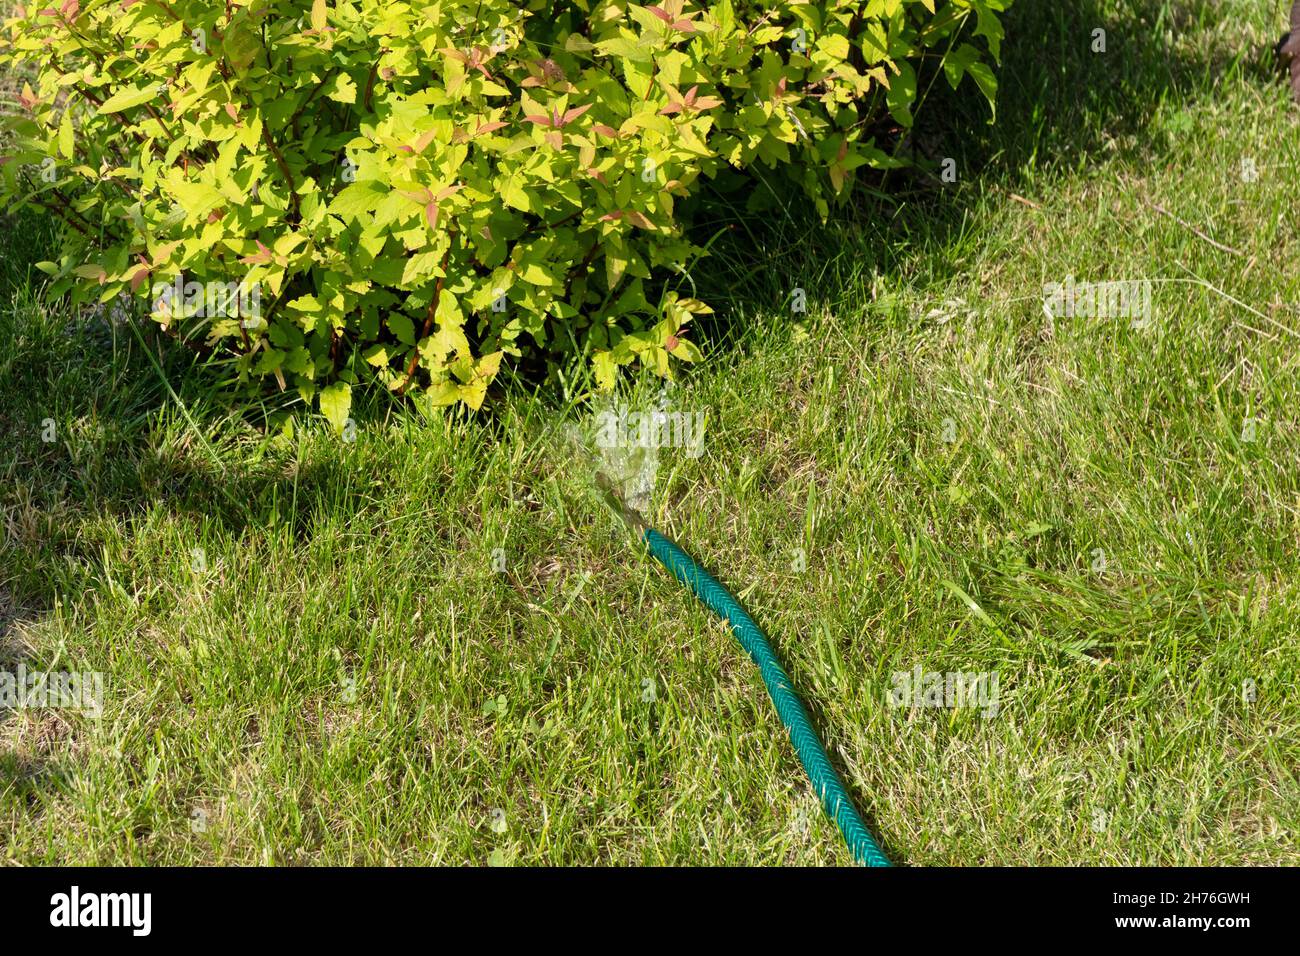 Watering a Japanese spirea bush from a flexible garden hose lying on the lawn on a sunny summer day. Stock Photo